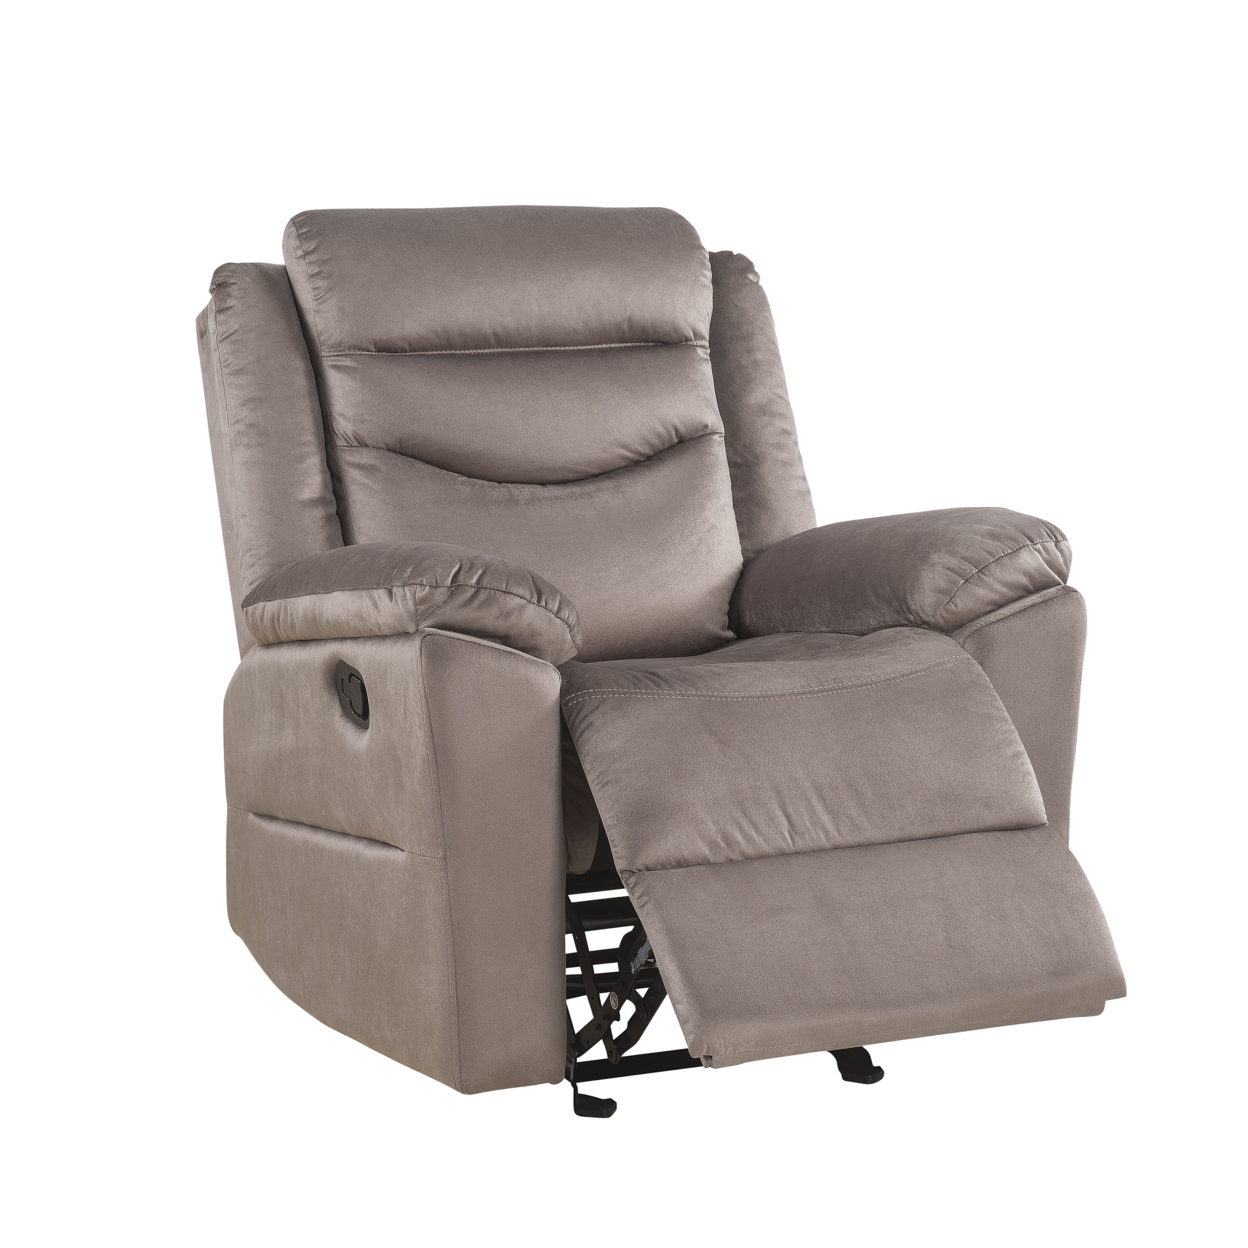 Fabric Upholstered Glider Recliner With Tufted Back Cushions, Brown- Saltoro Sherpi